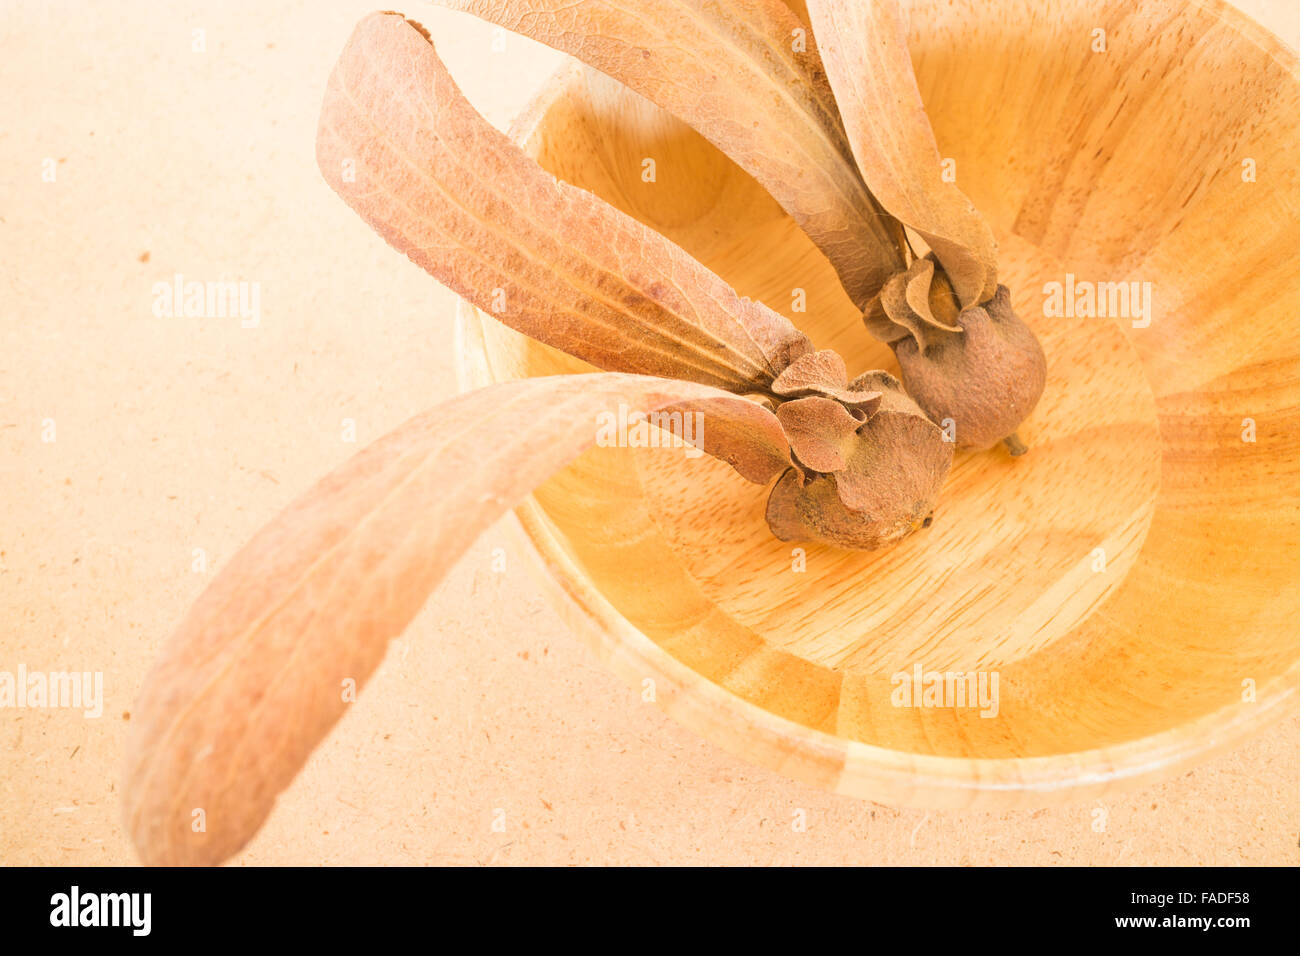 Two-winged fruit of Dipterocarpus on wooden table, stock photo Stock Photo